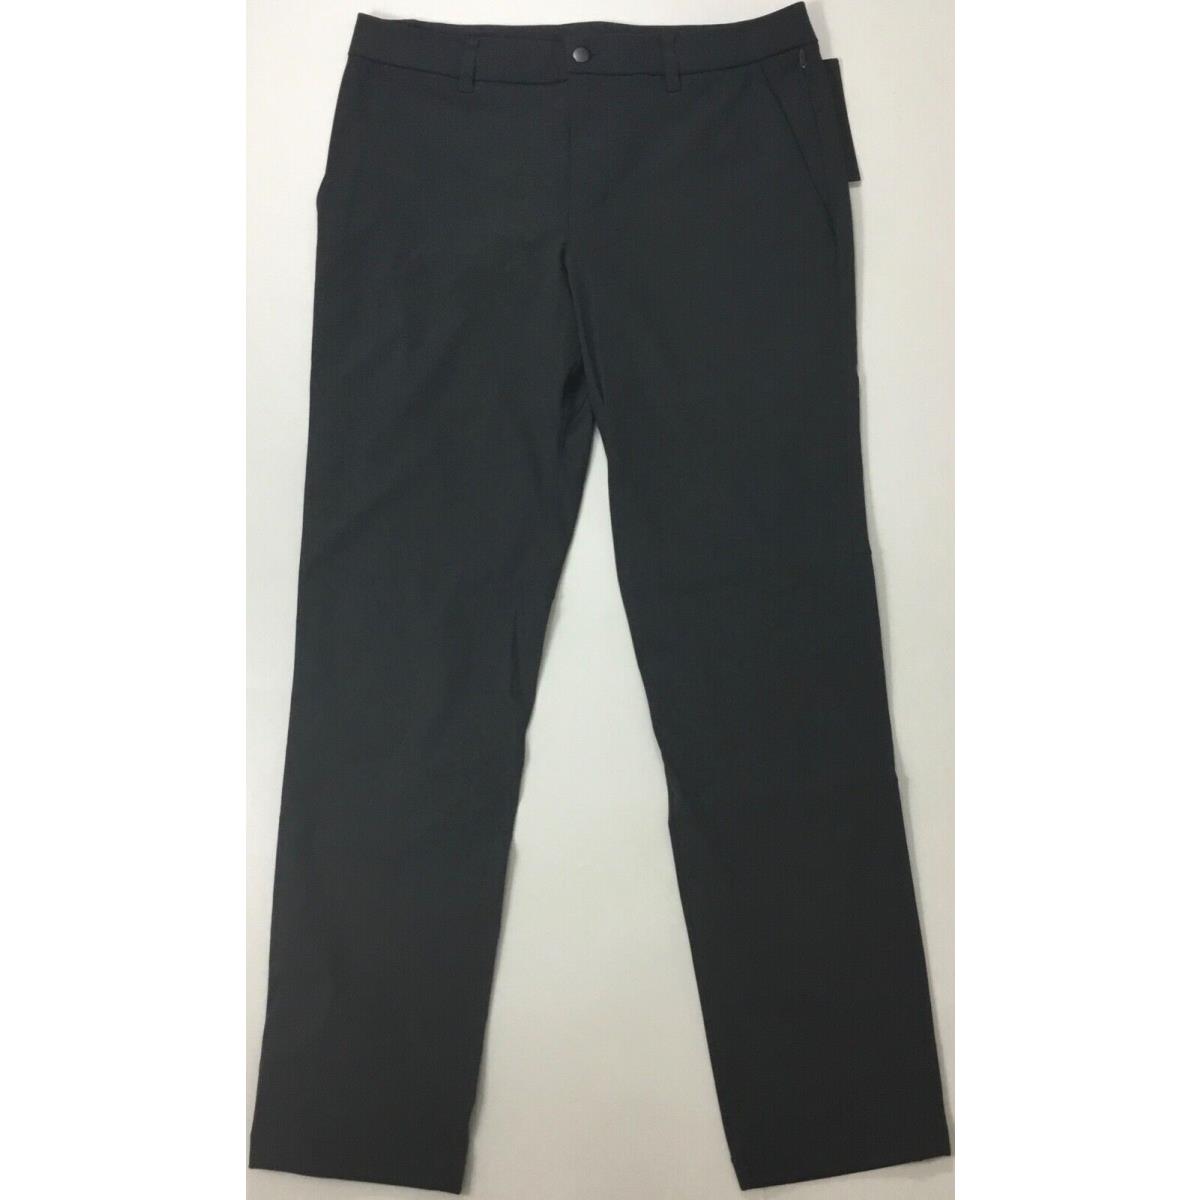 Lululemon Men Commission Pant Relaxed 34 L LM5442S Obsi Gray Size 34